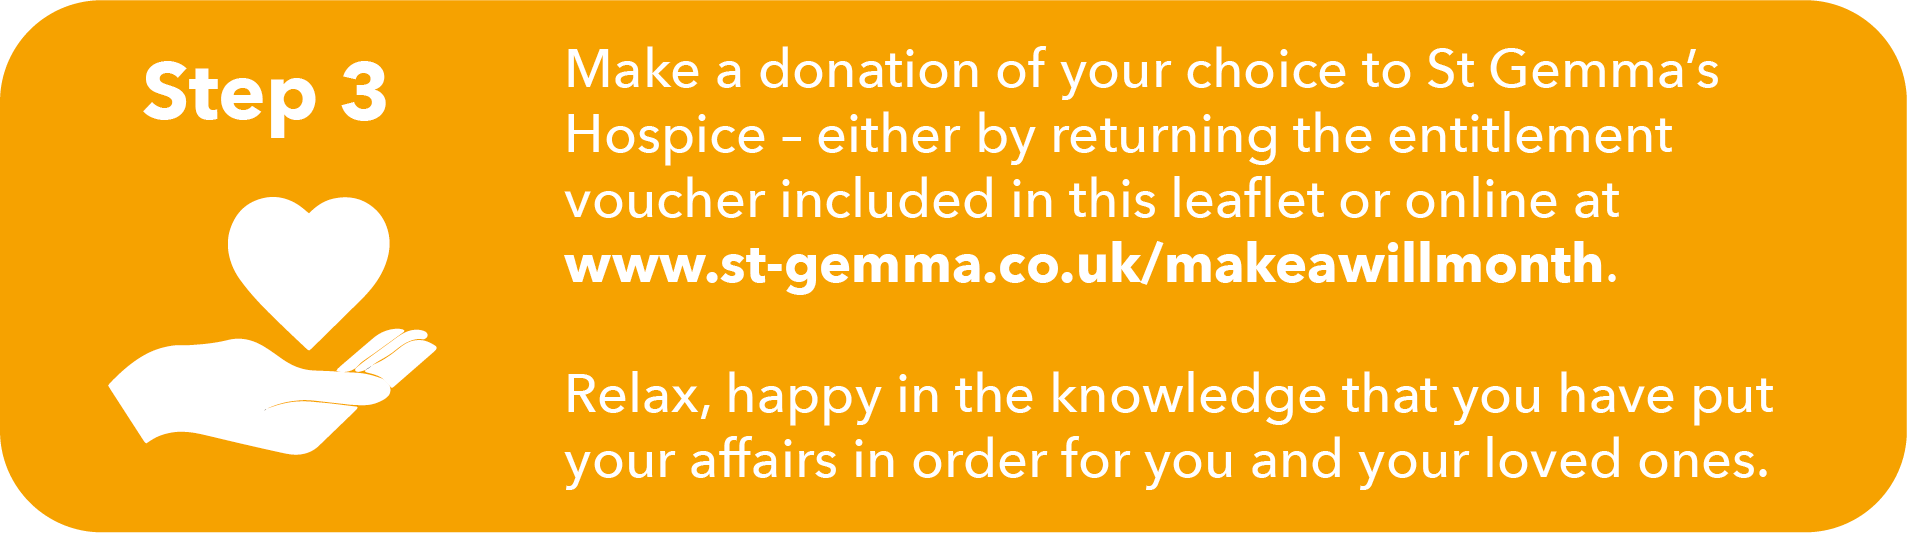 Image with written instructions. Step 3: Make a donation of your choice to St Gemma’s Hospice – either by returning the entitlement voucher included in the leaflet or online. Relax, happy in the knowledge you have put your affairs in order for you and your loved ones.